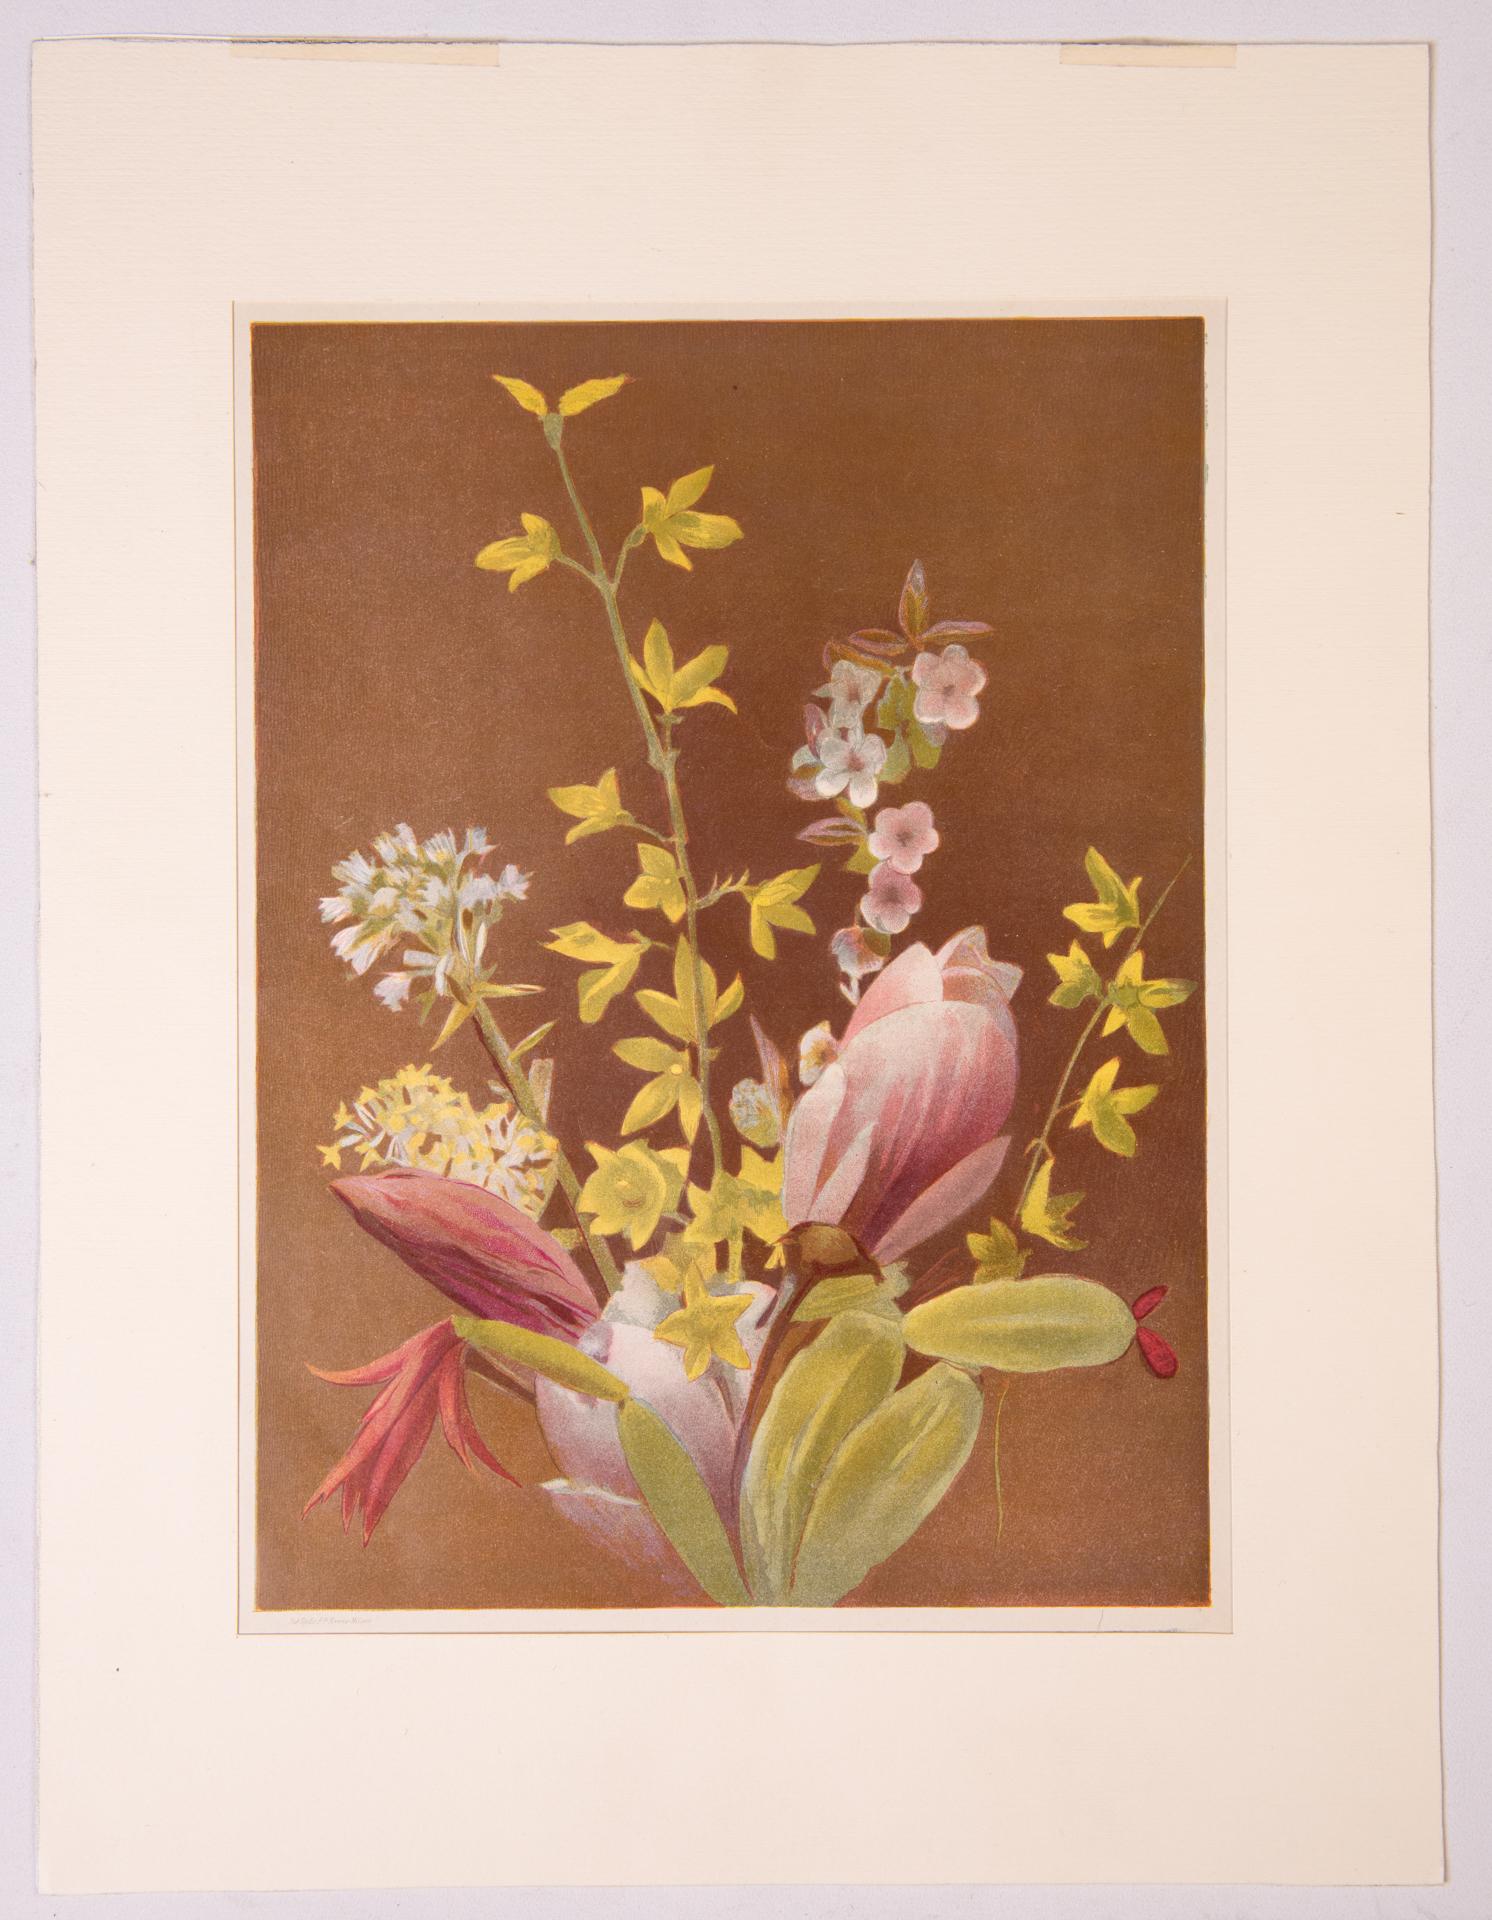 Other Pair of Antique Flower Prints For Sale